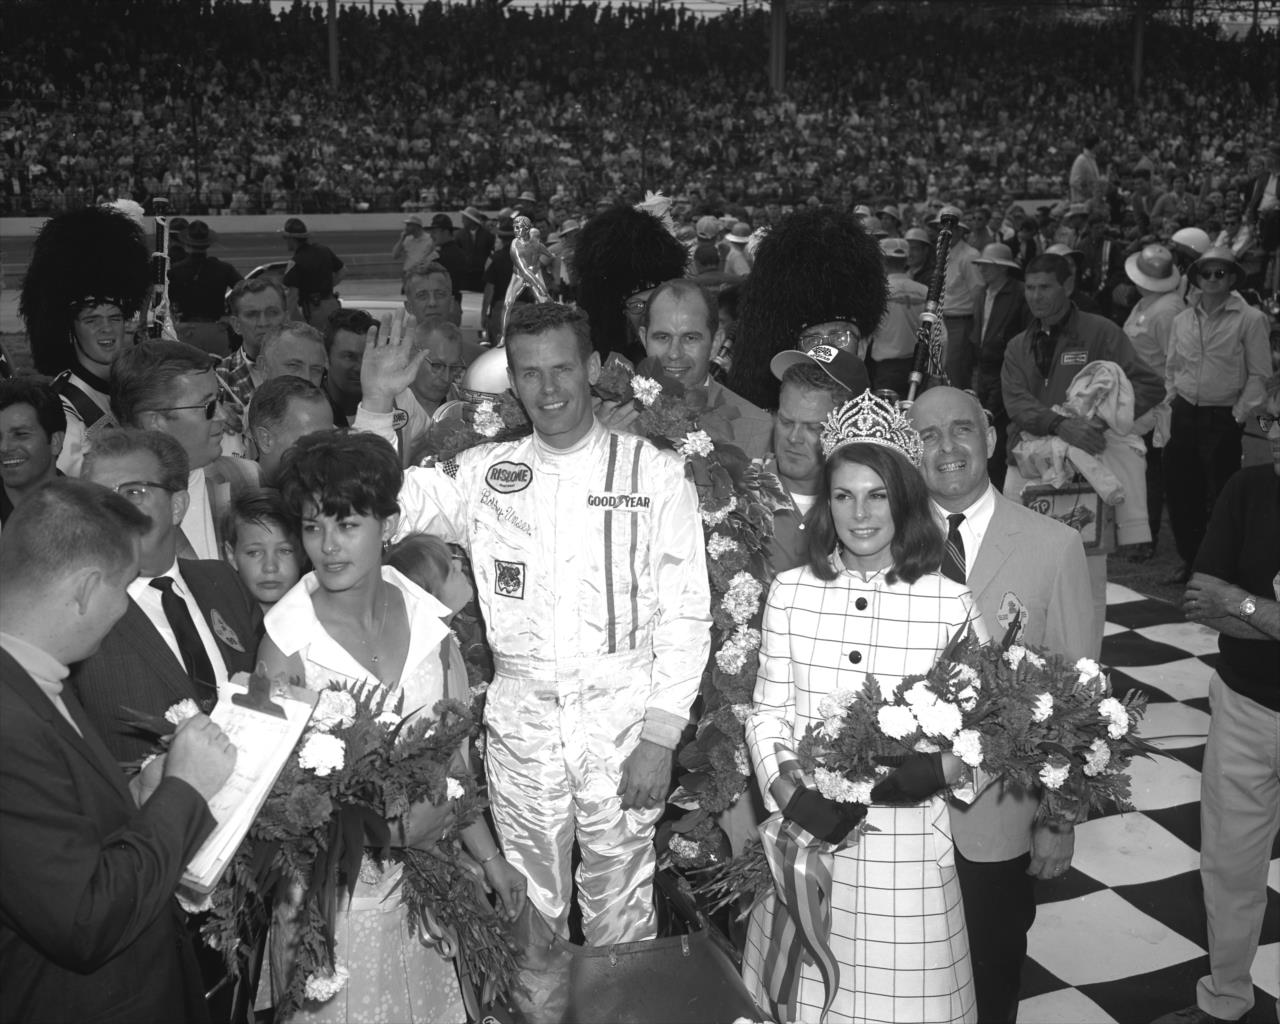 Bobby Unser in Victory Circle following his win in the 1968 Indianapolis 500